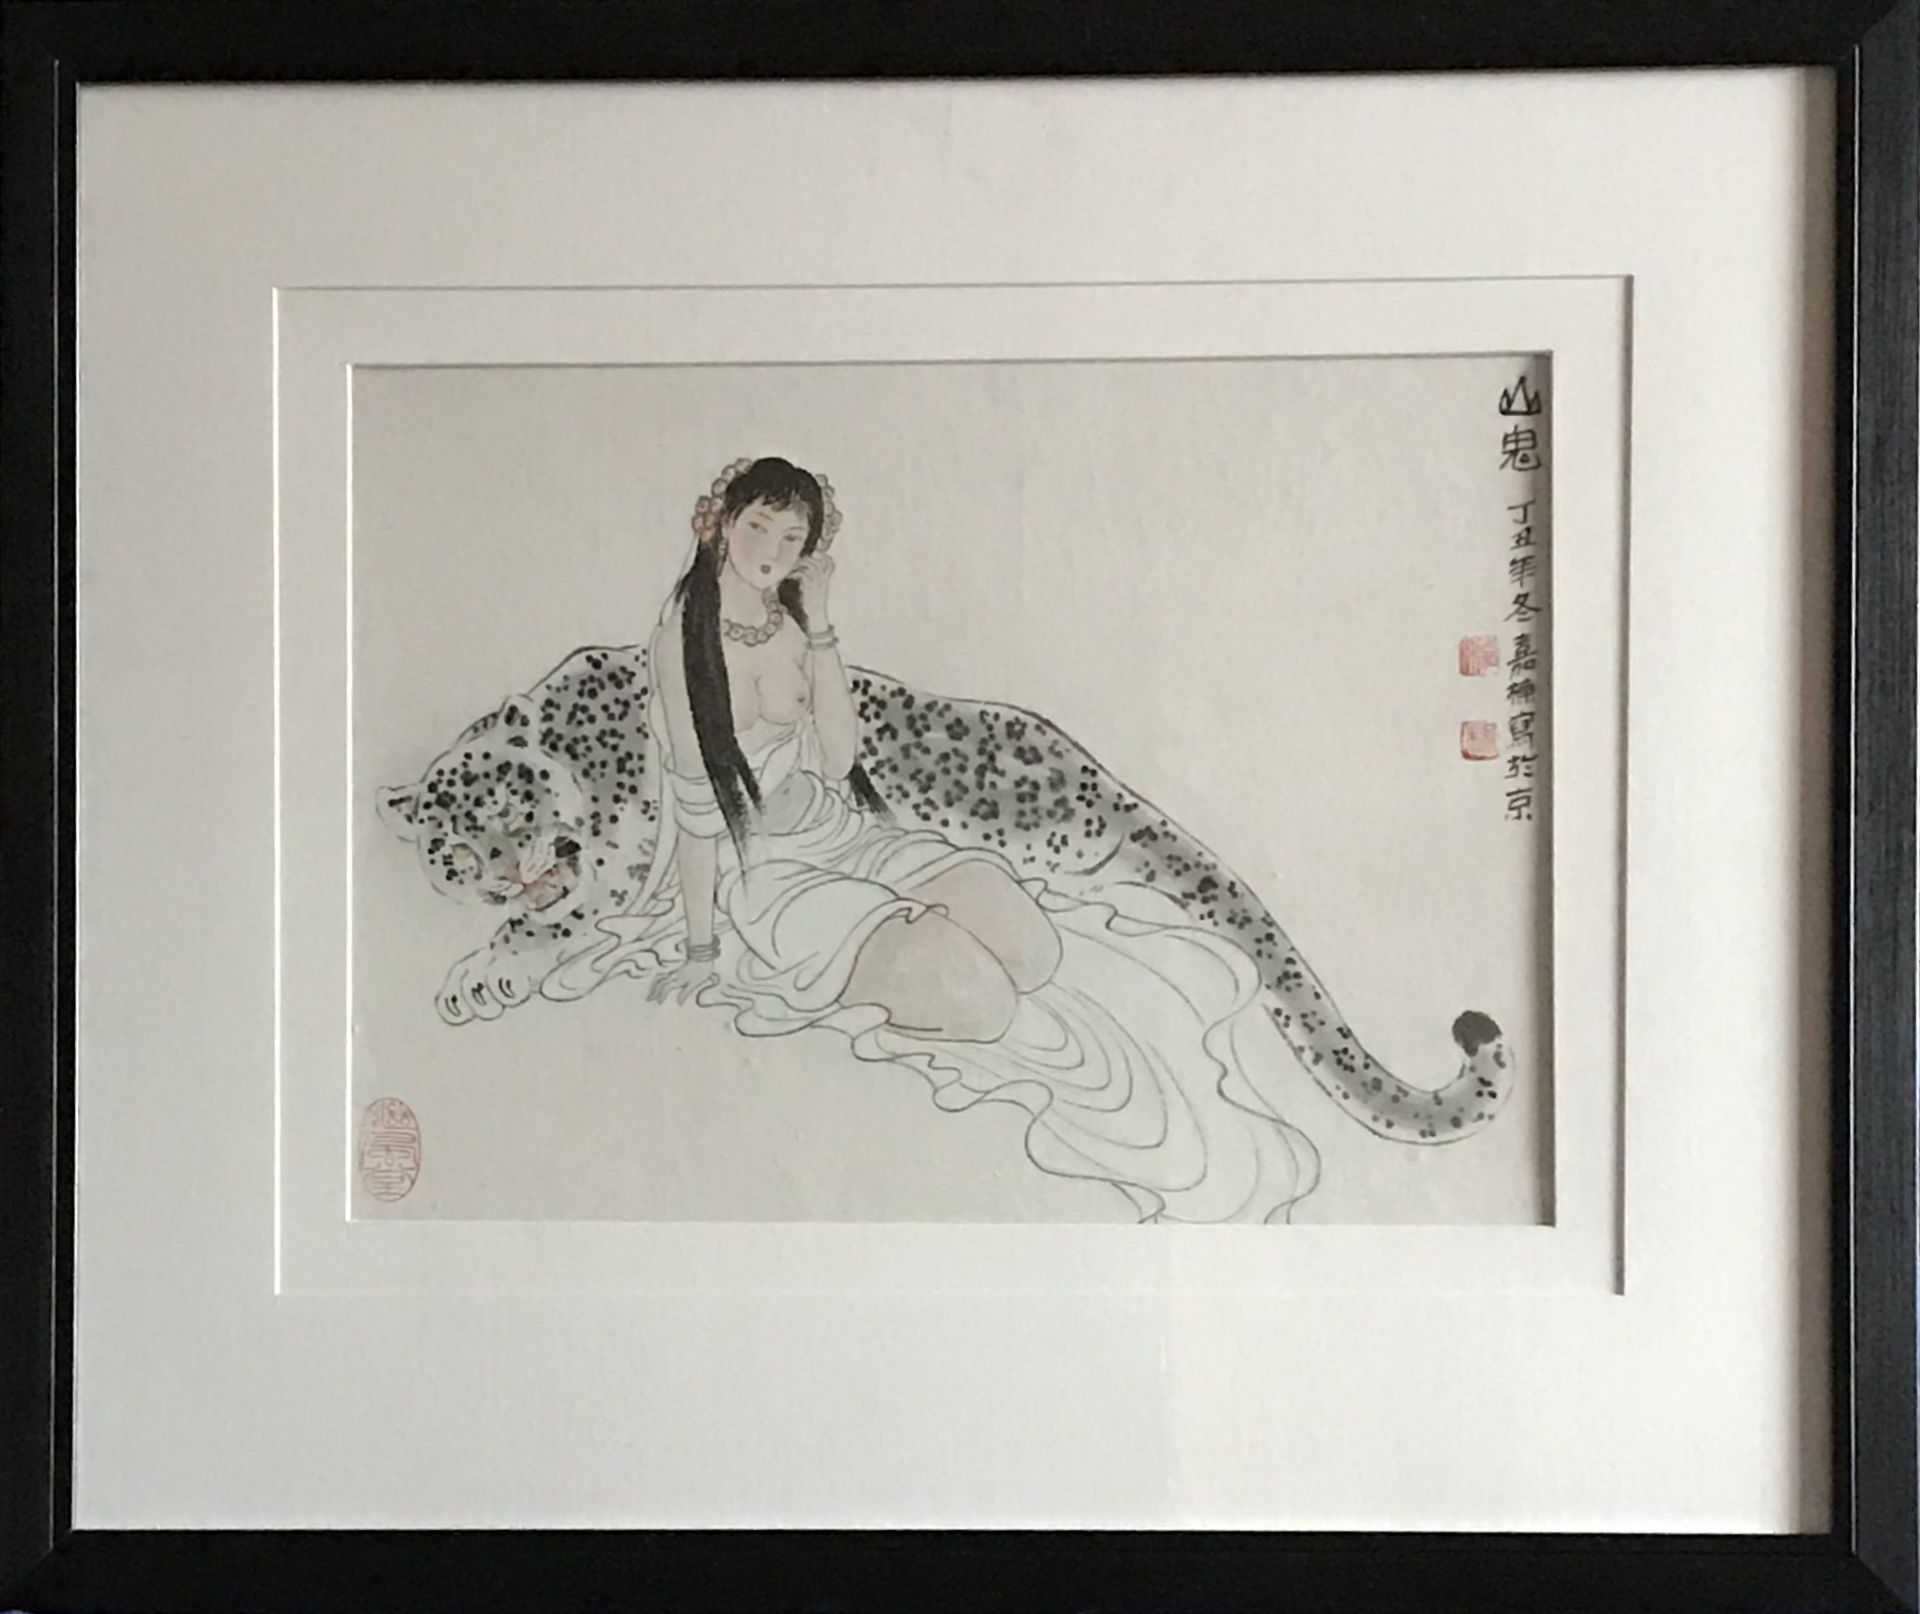 Chinese Princess with Leopard "Shangui" watercolour - Image 3 of 4